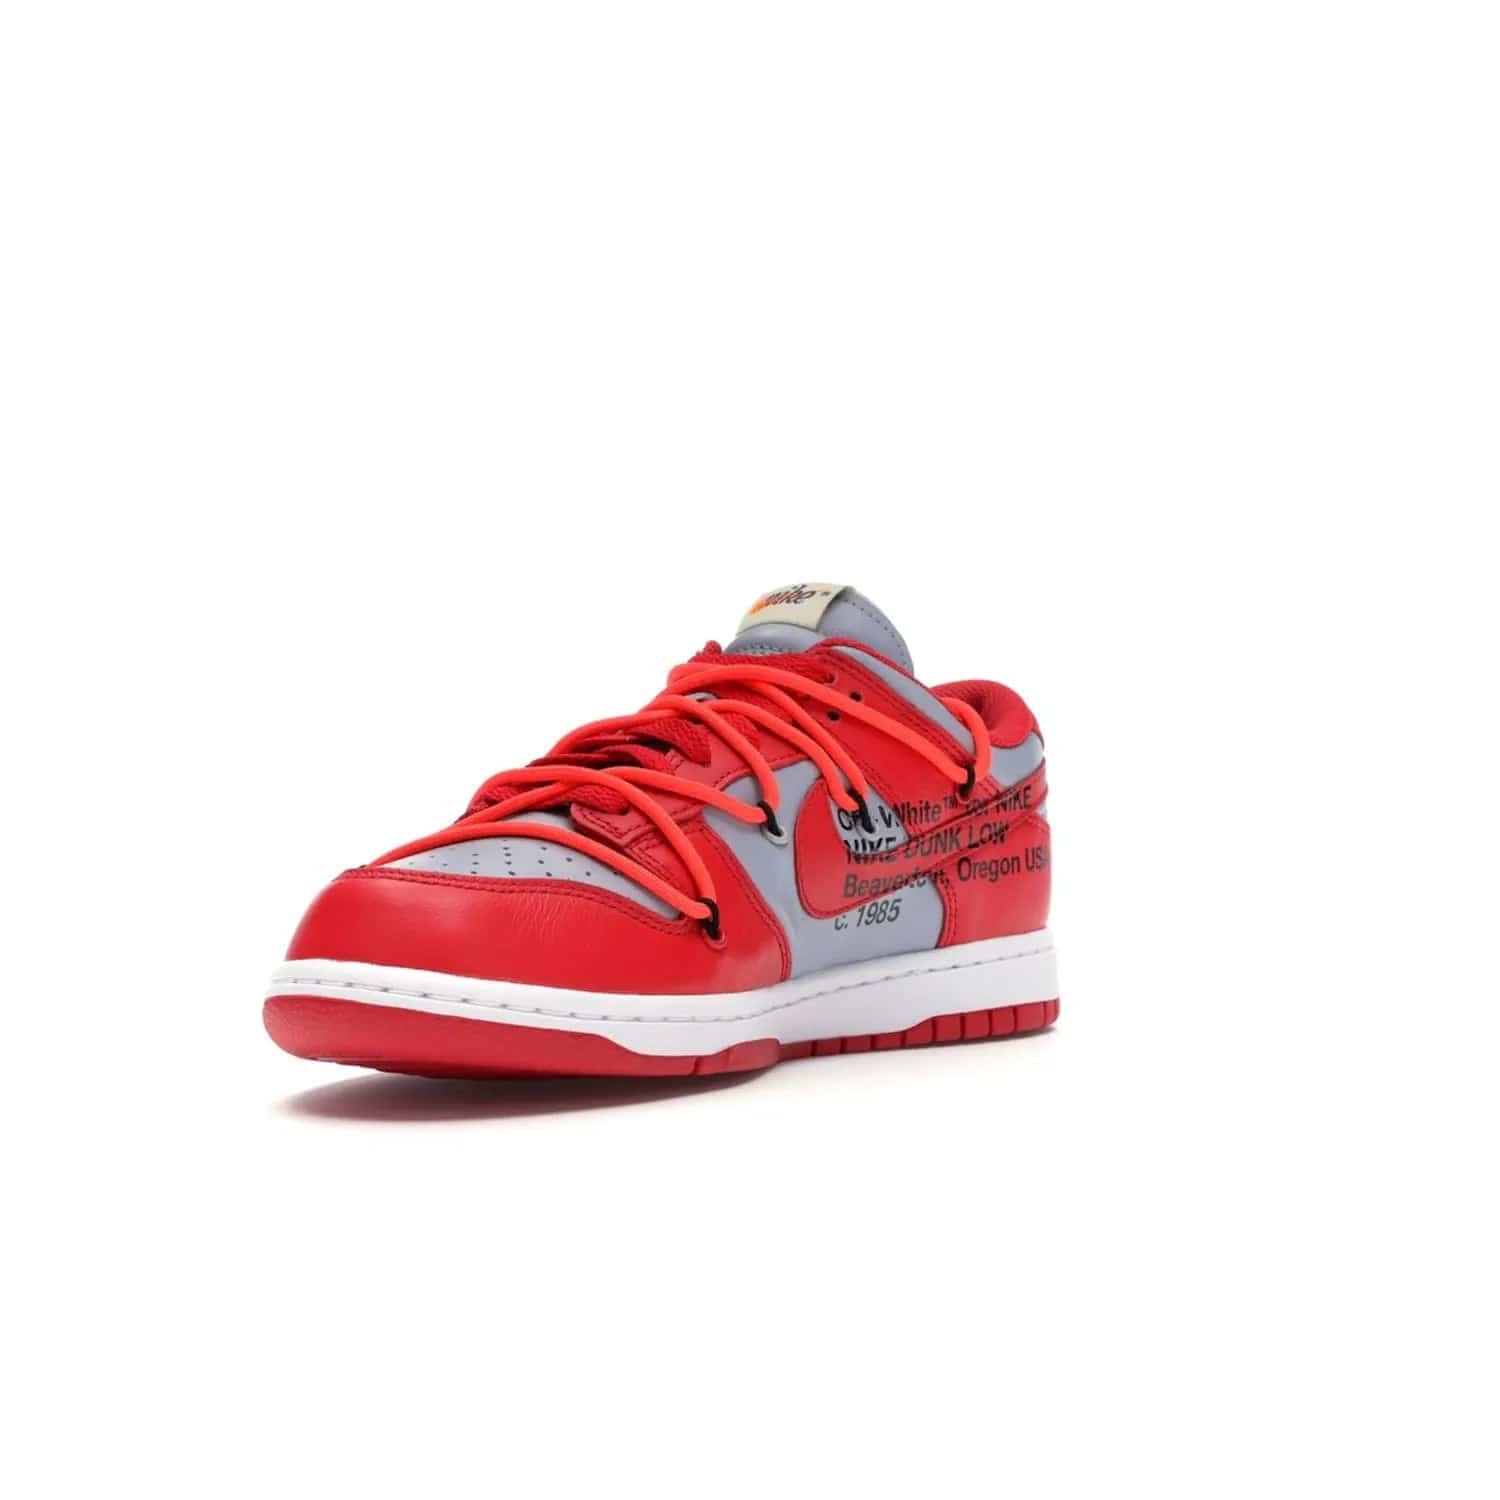 Nike Dunk Low Off-White University Red - Image 14 - Only at www.BallersClubKickz.com - The Nike Dunk Low Off-White University Red offers tribute to classic Nike Basketball silhouettes. Features include wolf grey leather, university red overlays, zip-ties, and Off-White text. Perfect for any sneaker fan, these stylish sneakers released in December of 2019.